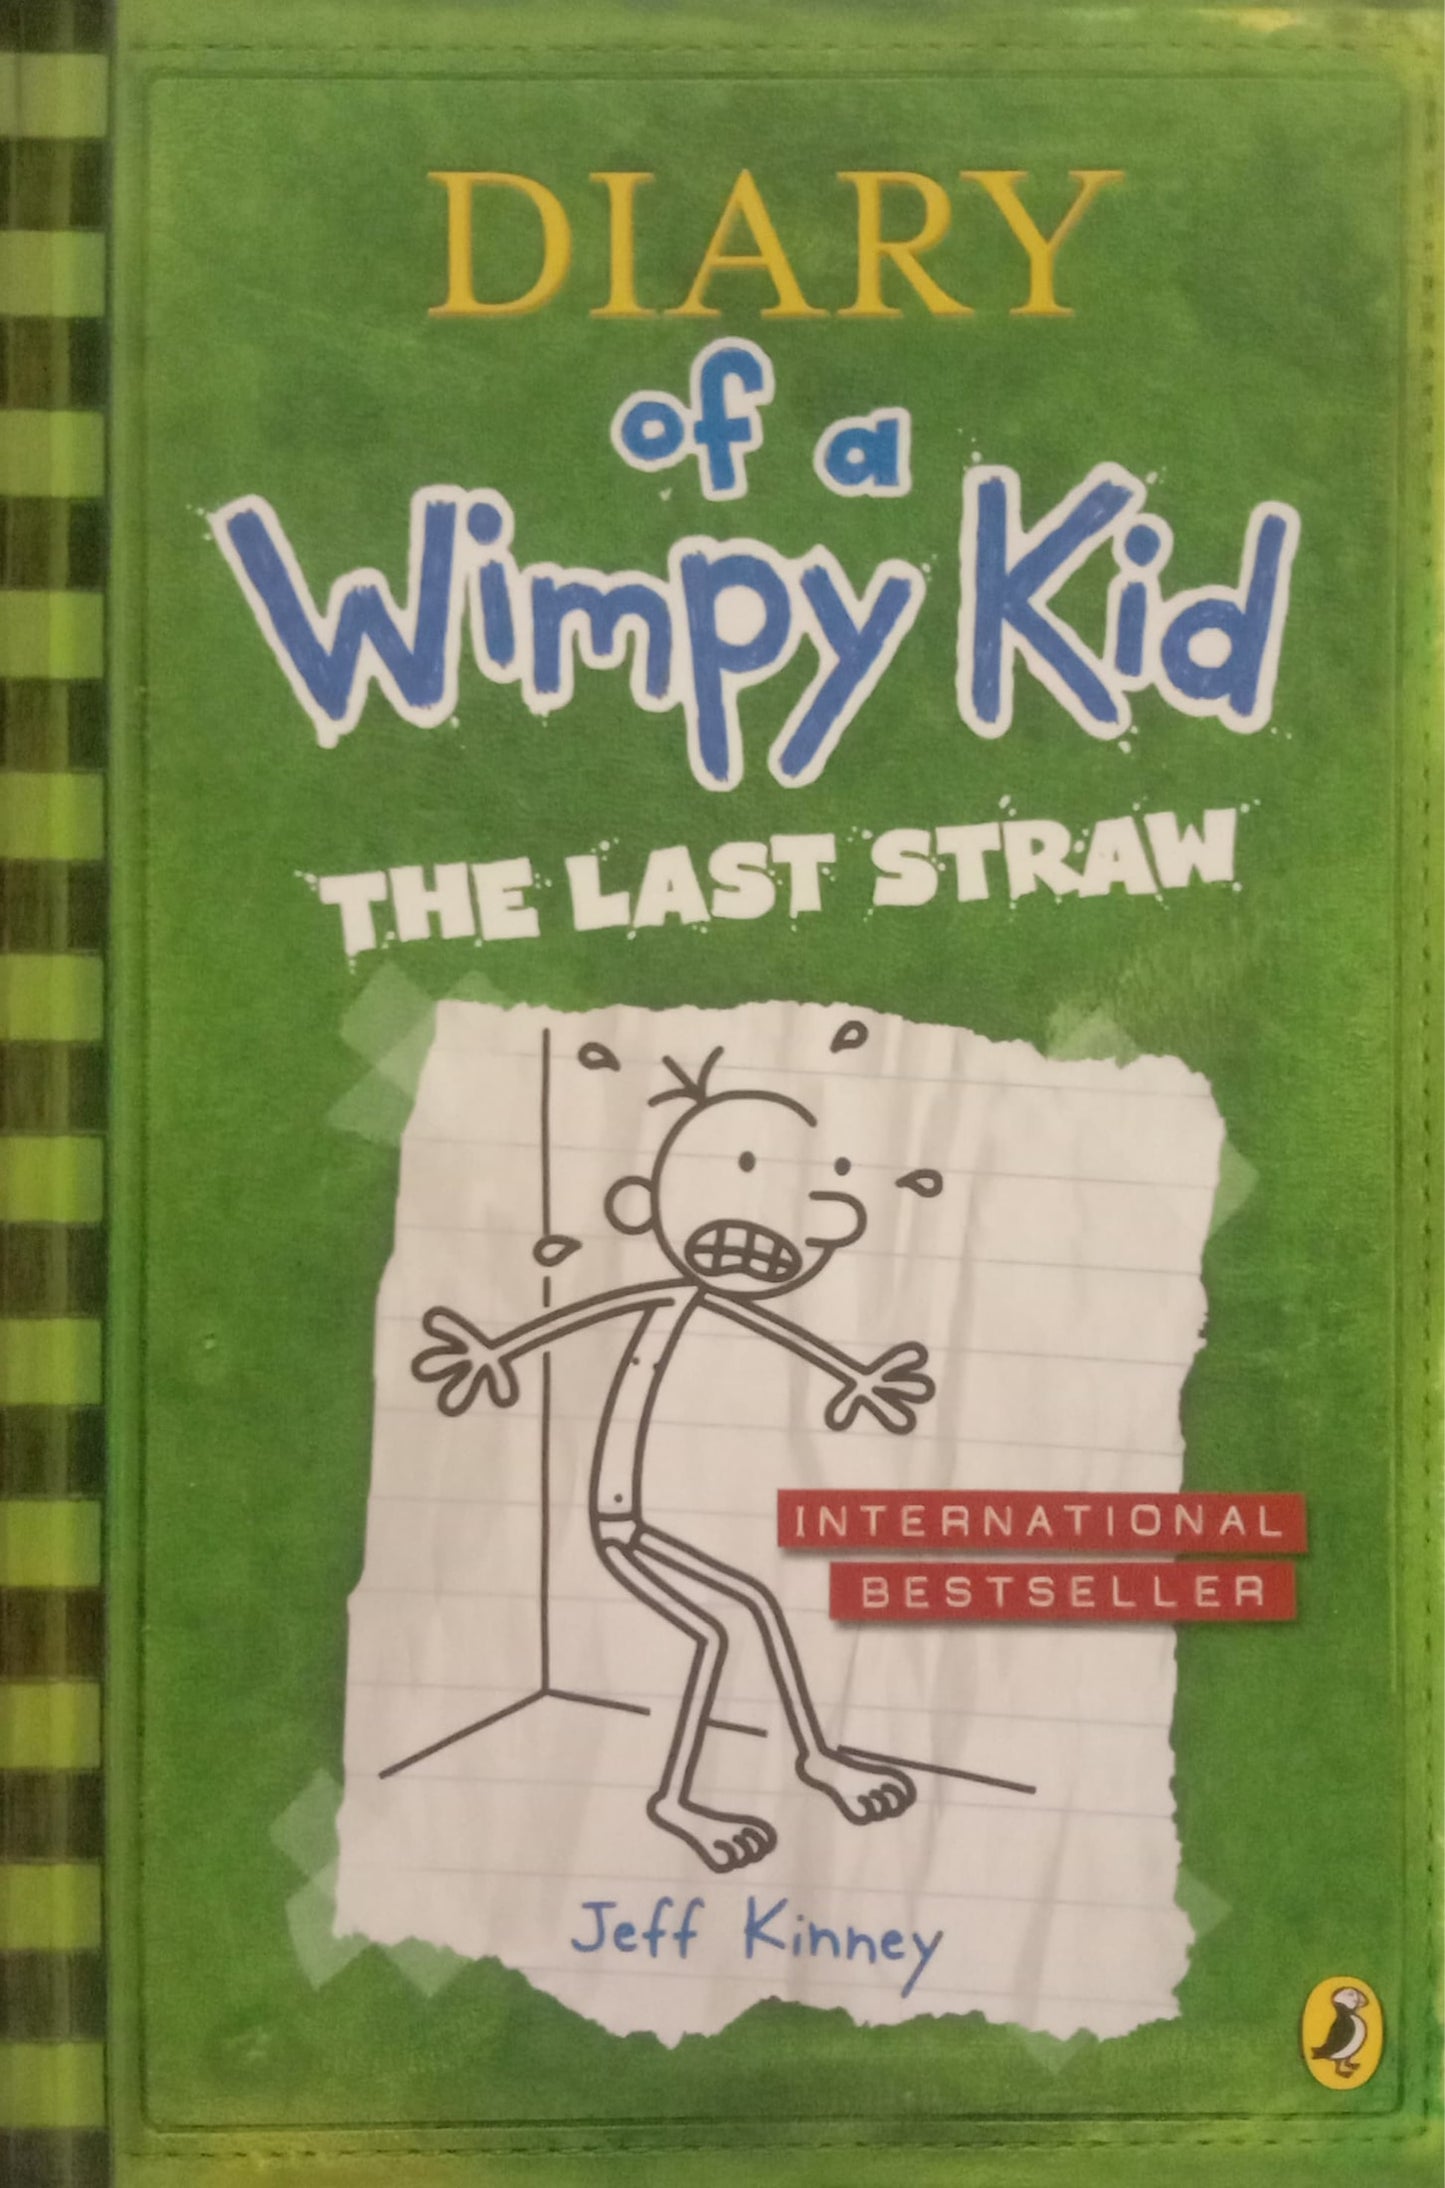 DIARY OF A WIMPY KID -THE LAST STRAW